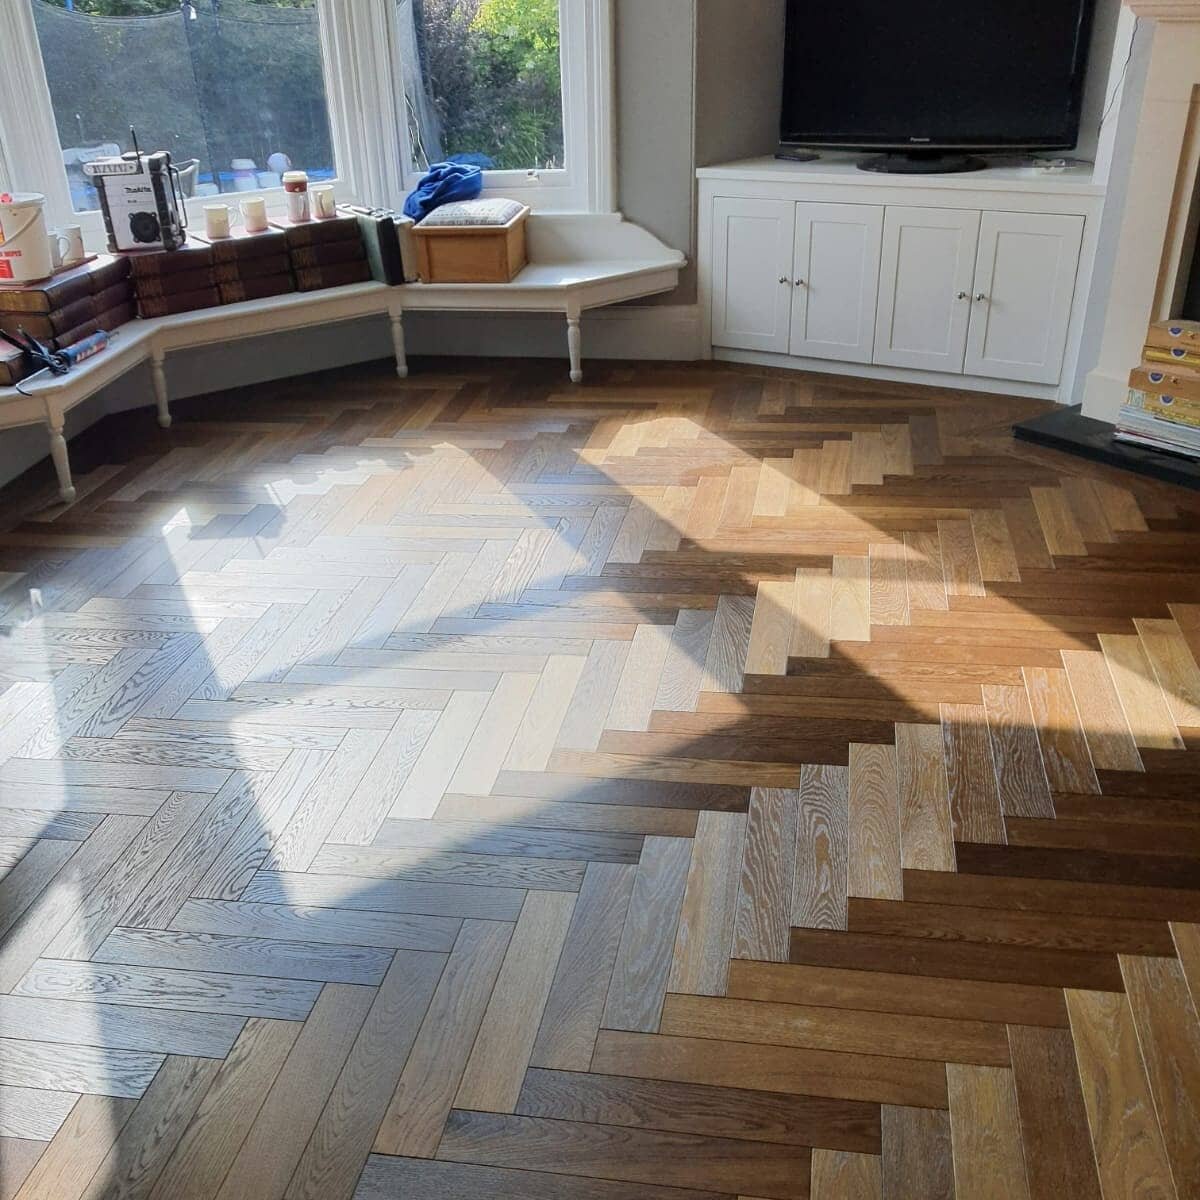 Just wow! 

Installed in Harrogate with our 15mm Dark Smoked Herringbone With Planked Border. Code 941

Huscroft Flooring Limited